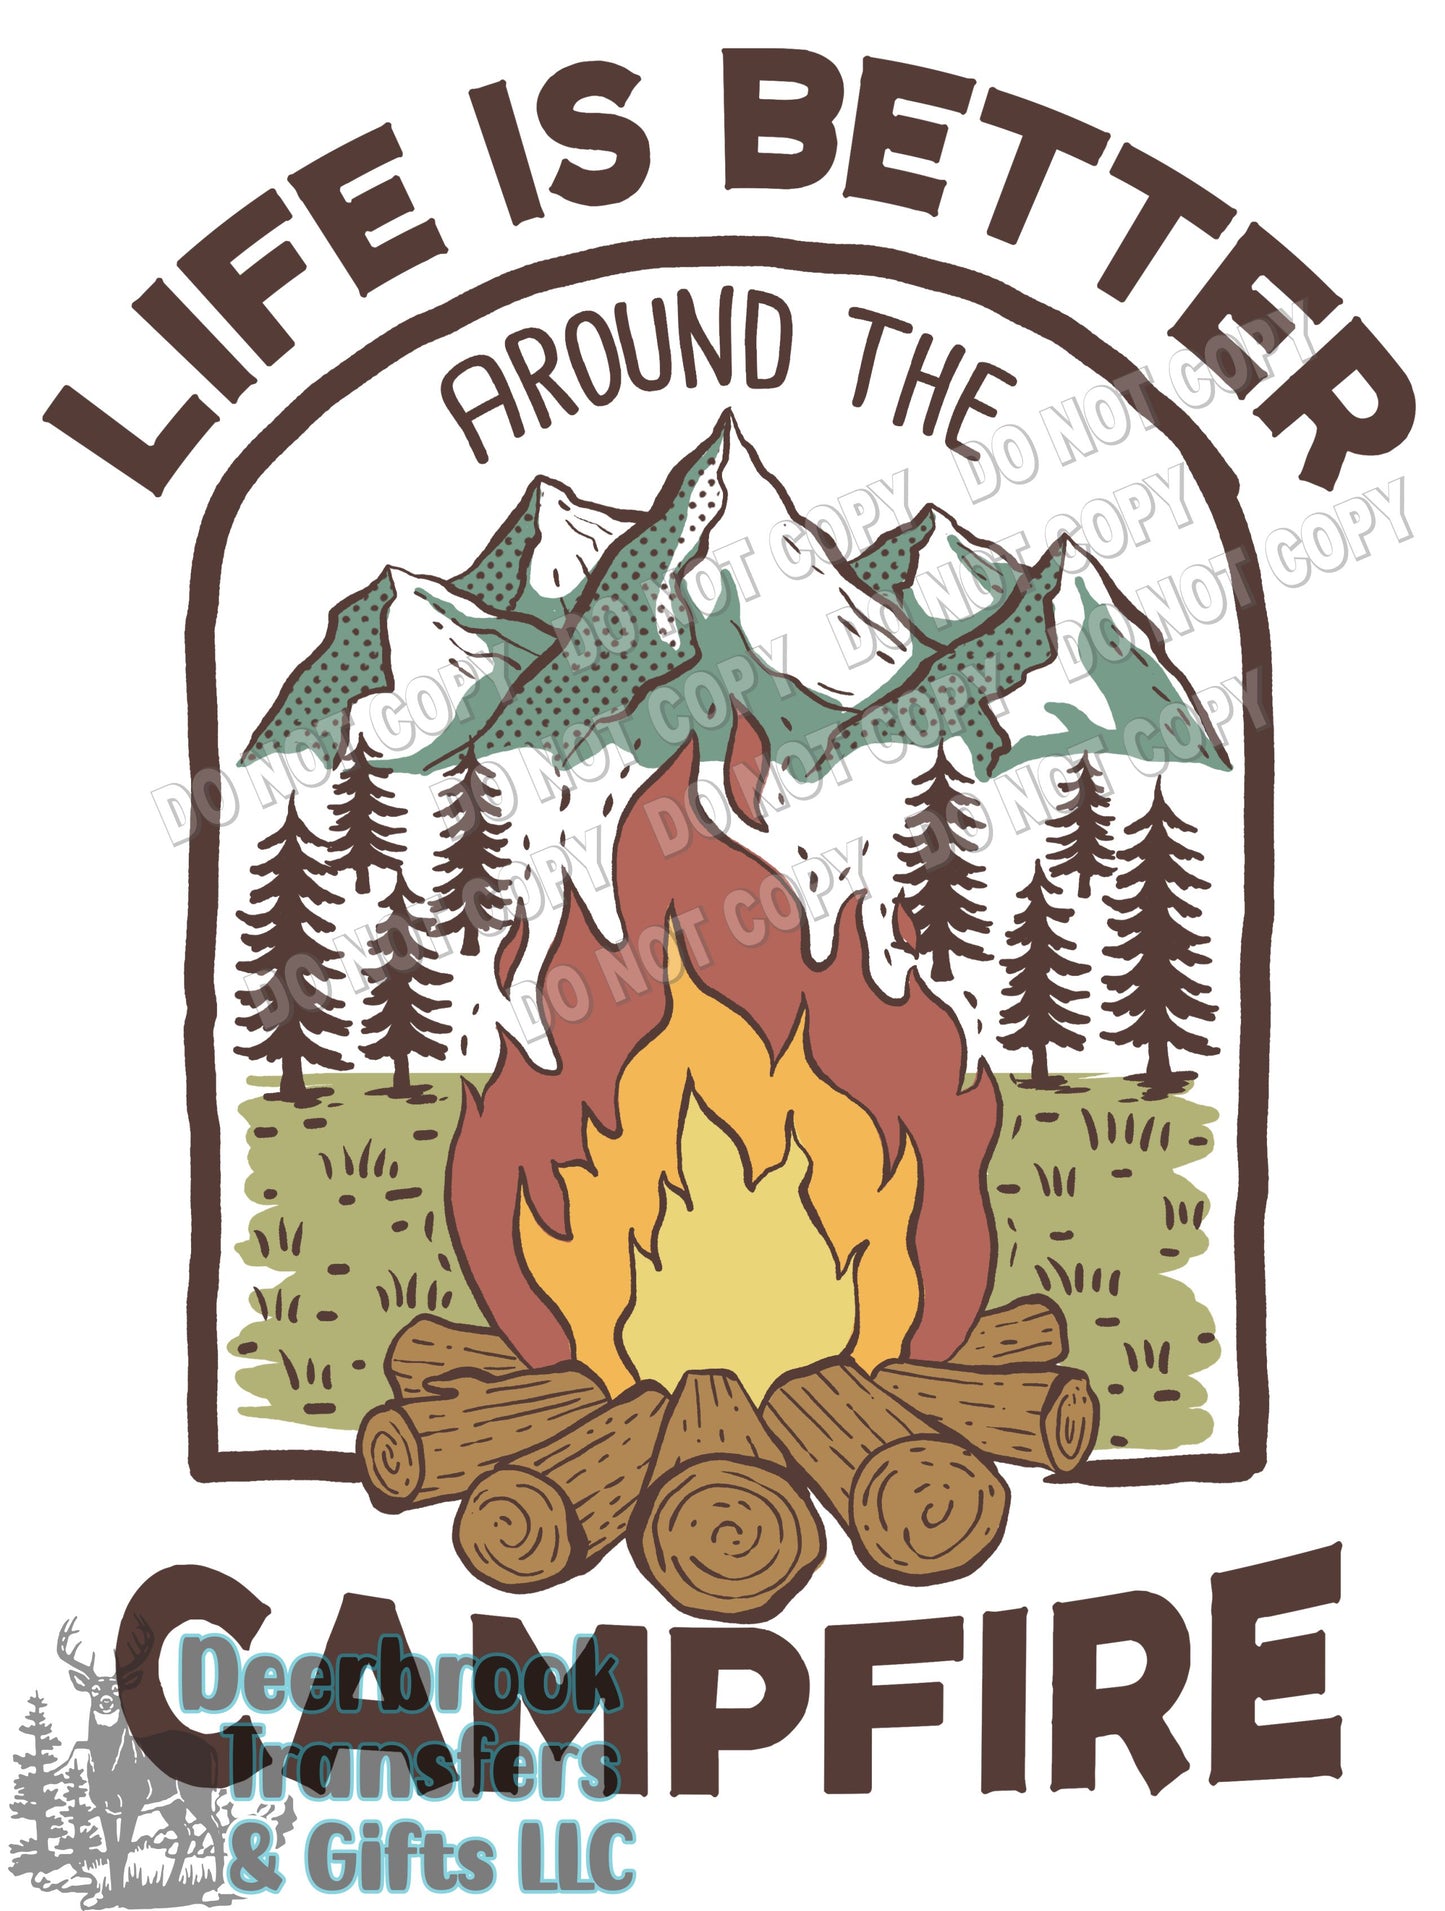 Life is better around the campfire transfer